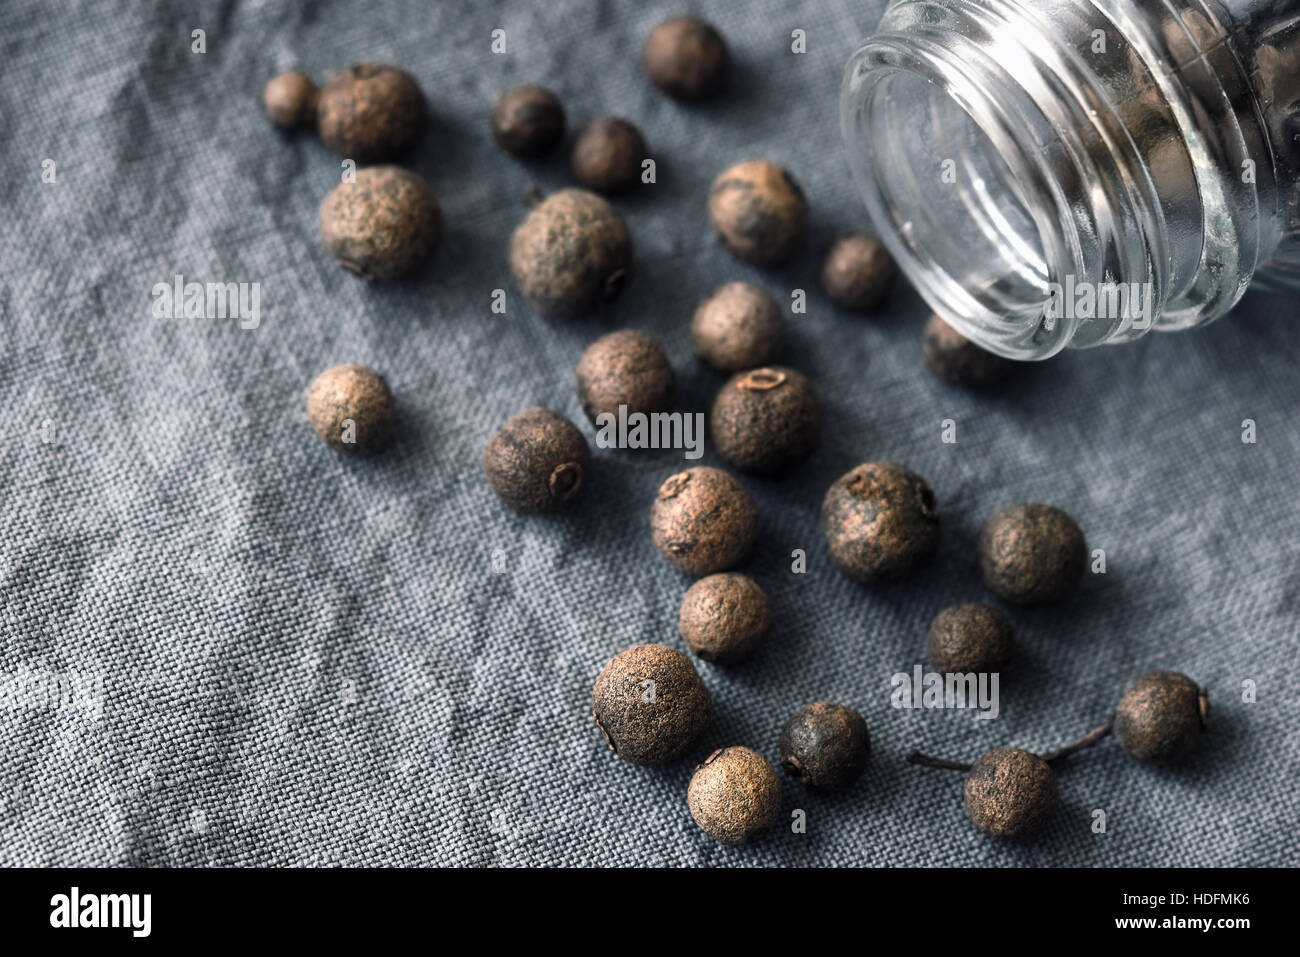 Allspice in the glass jar on the grey cloth Stock Photo